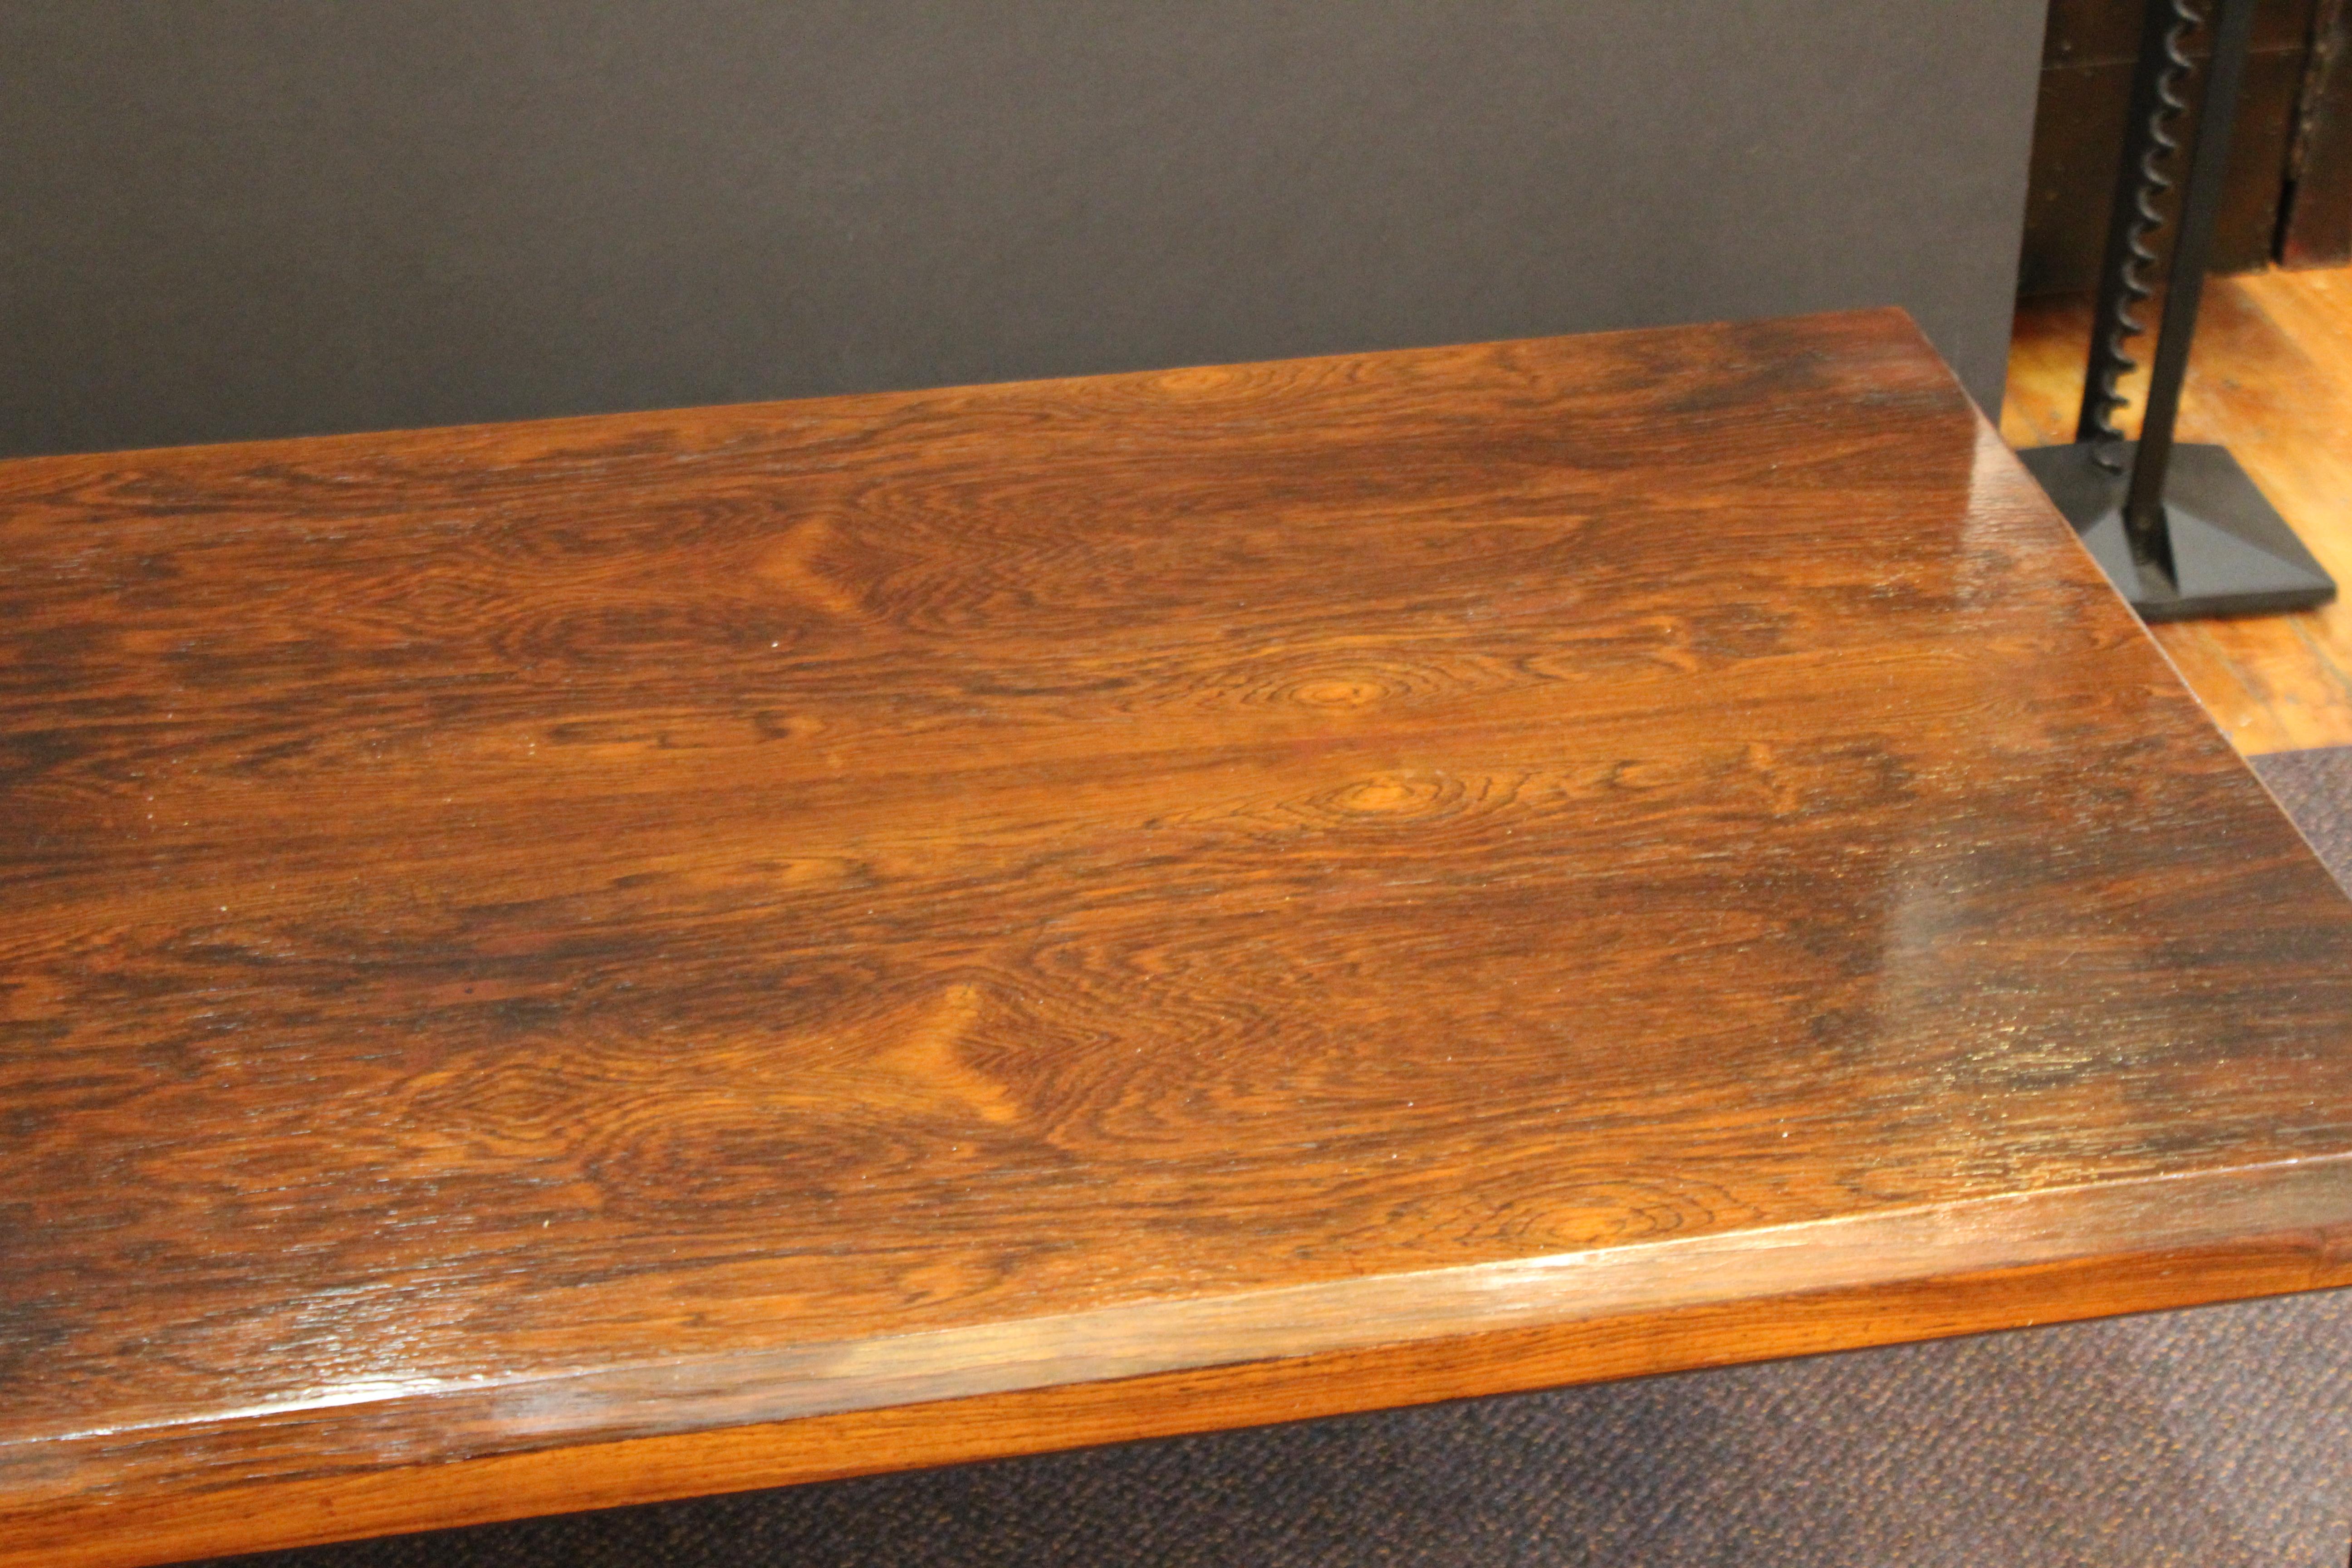 Danish Mid-Century Modern wood coffee table or cocktail table made in the mid-20th century. The piece has a label from the Danish Furniture Makers quality control on the bottom and is in great vintage condition with very minor wear to the bottom